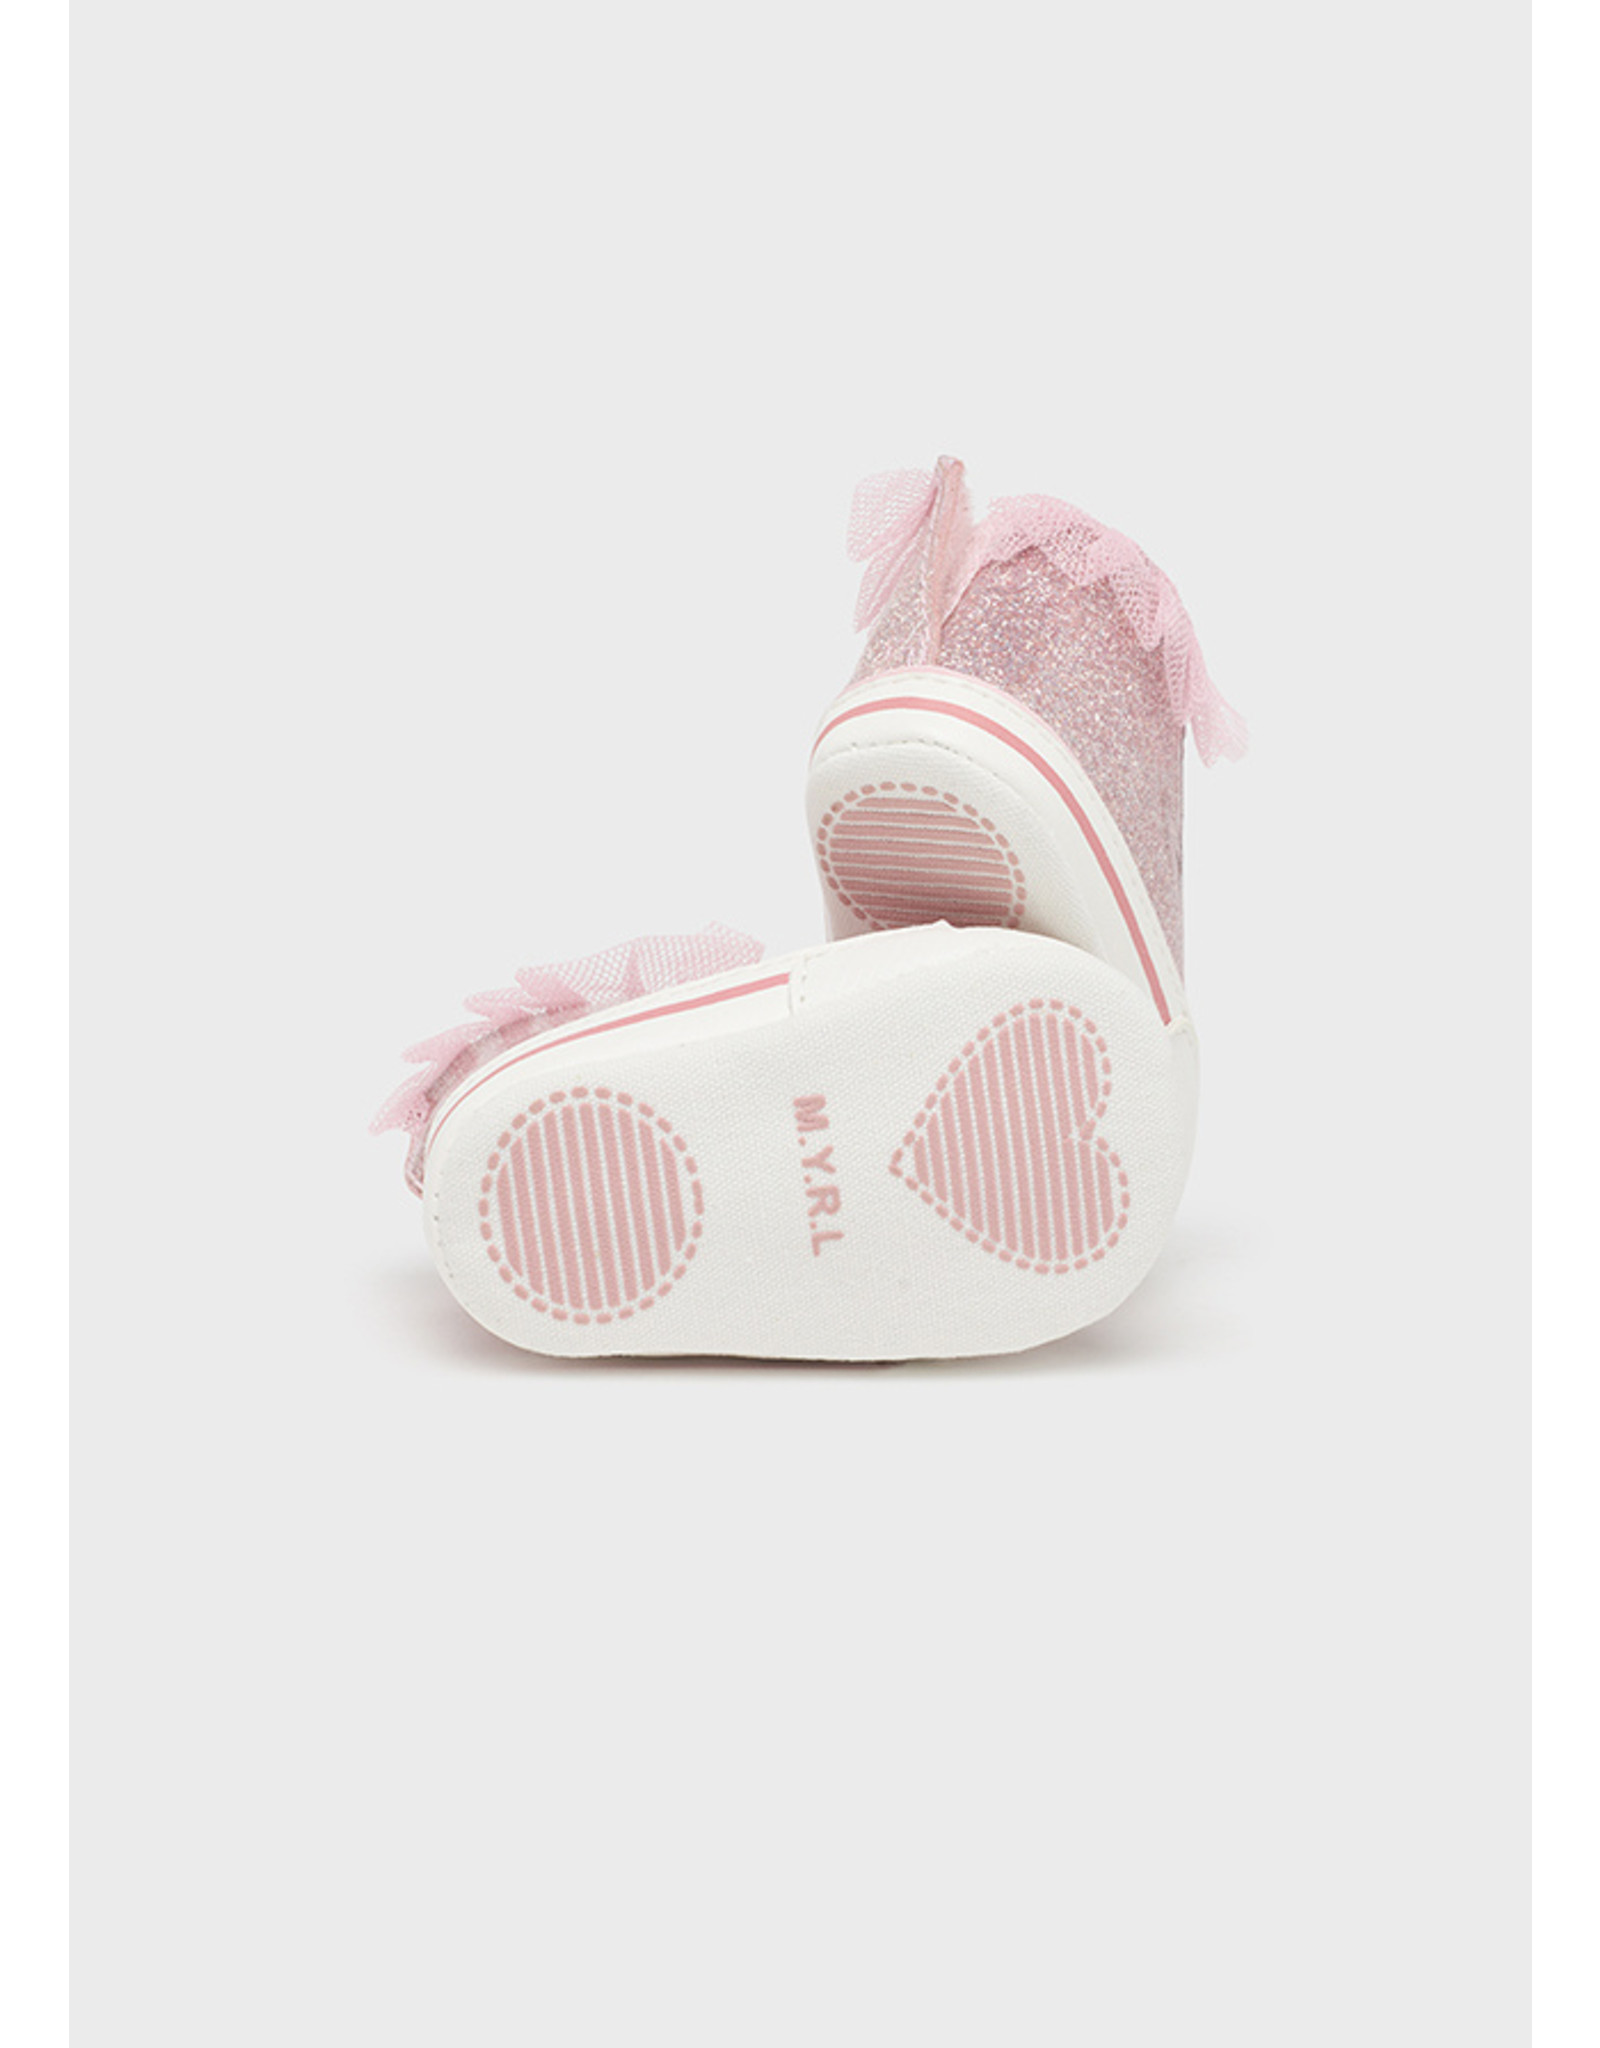 Mayoral Blush Shimmer Sneakers